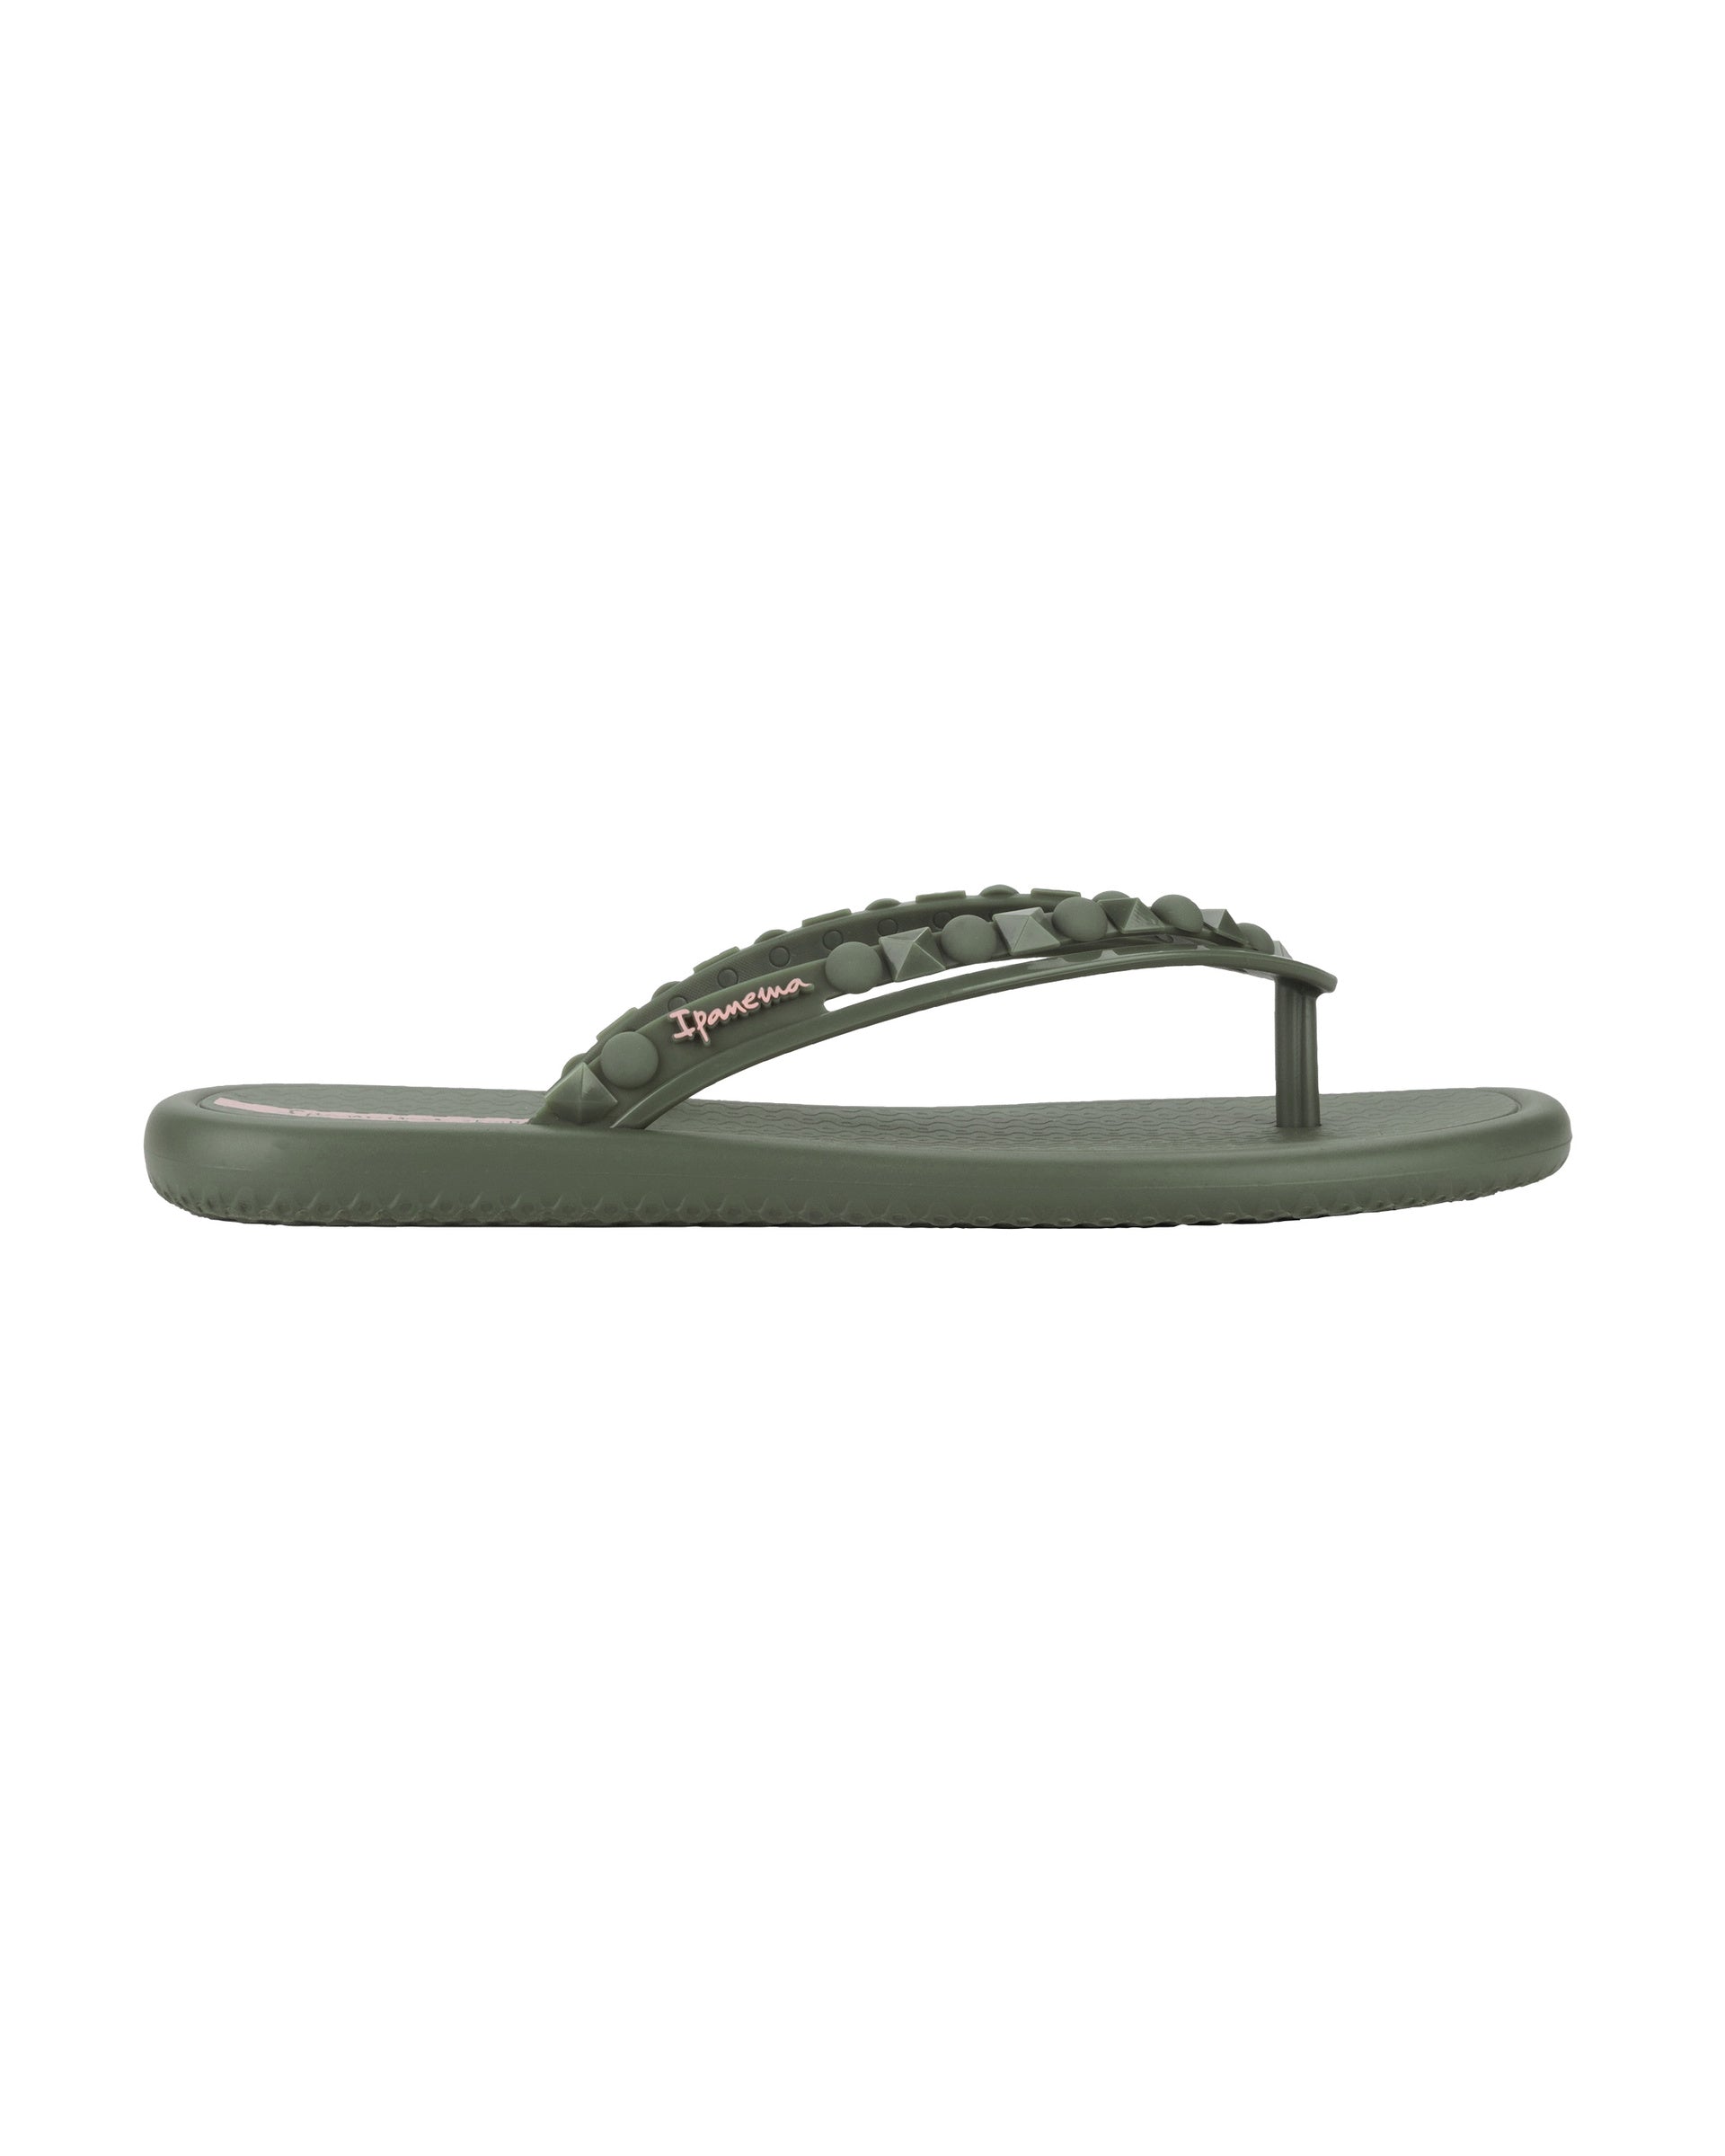 Side view of a green Ipanema Meu Sol women's flip flop with stud details on strap.